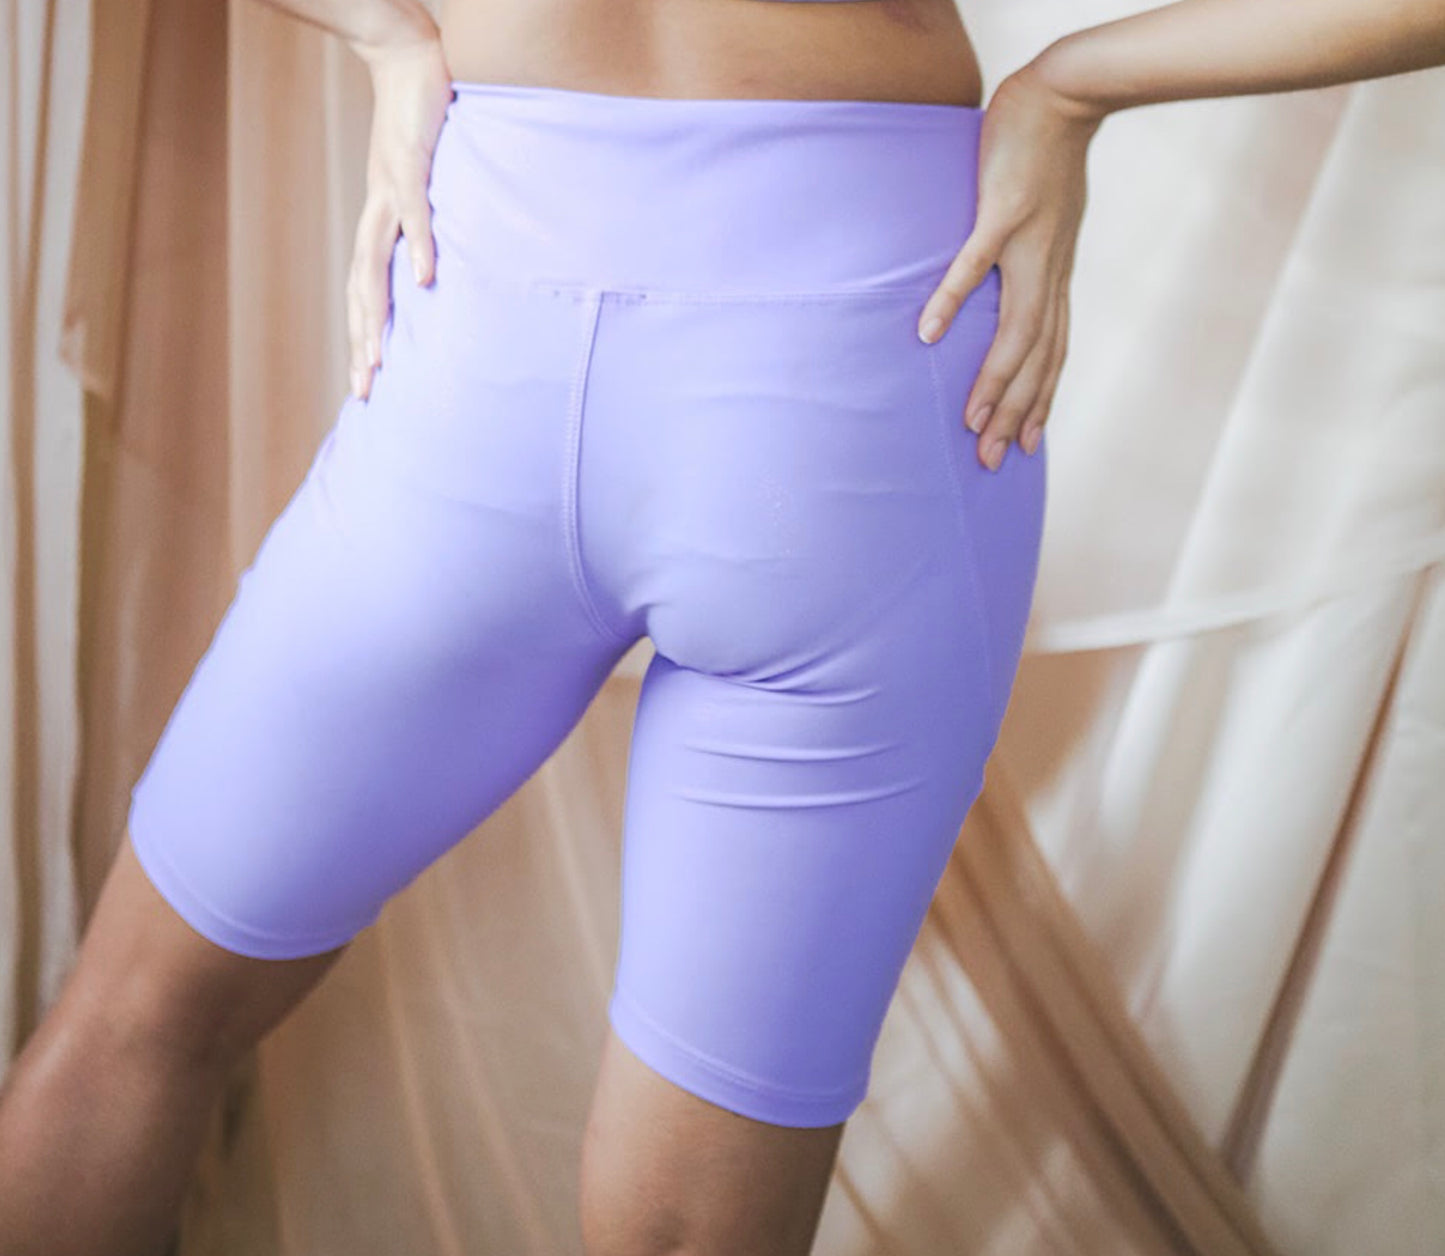 Cadlao Cycling Shorts in Purple Glitter